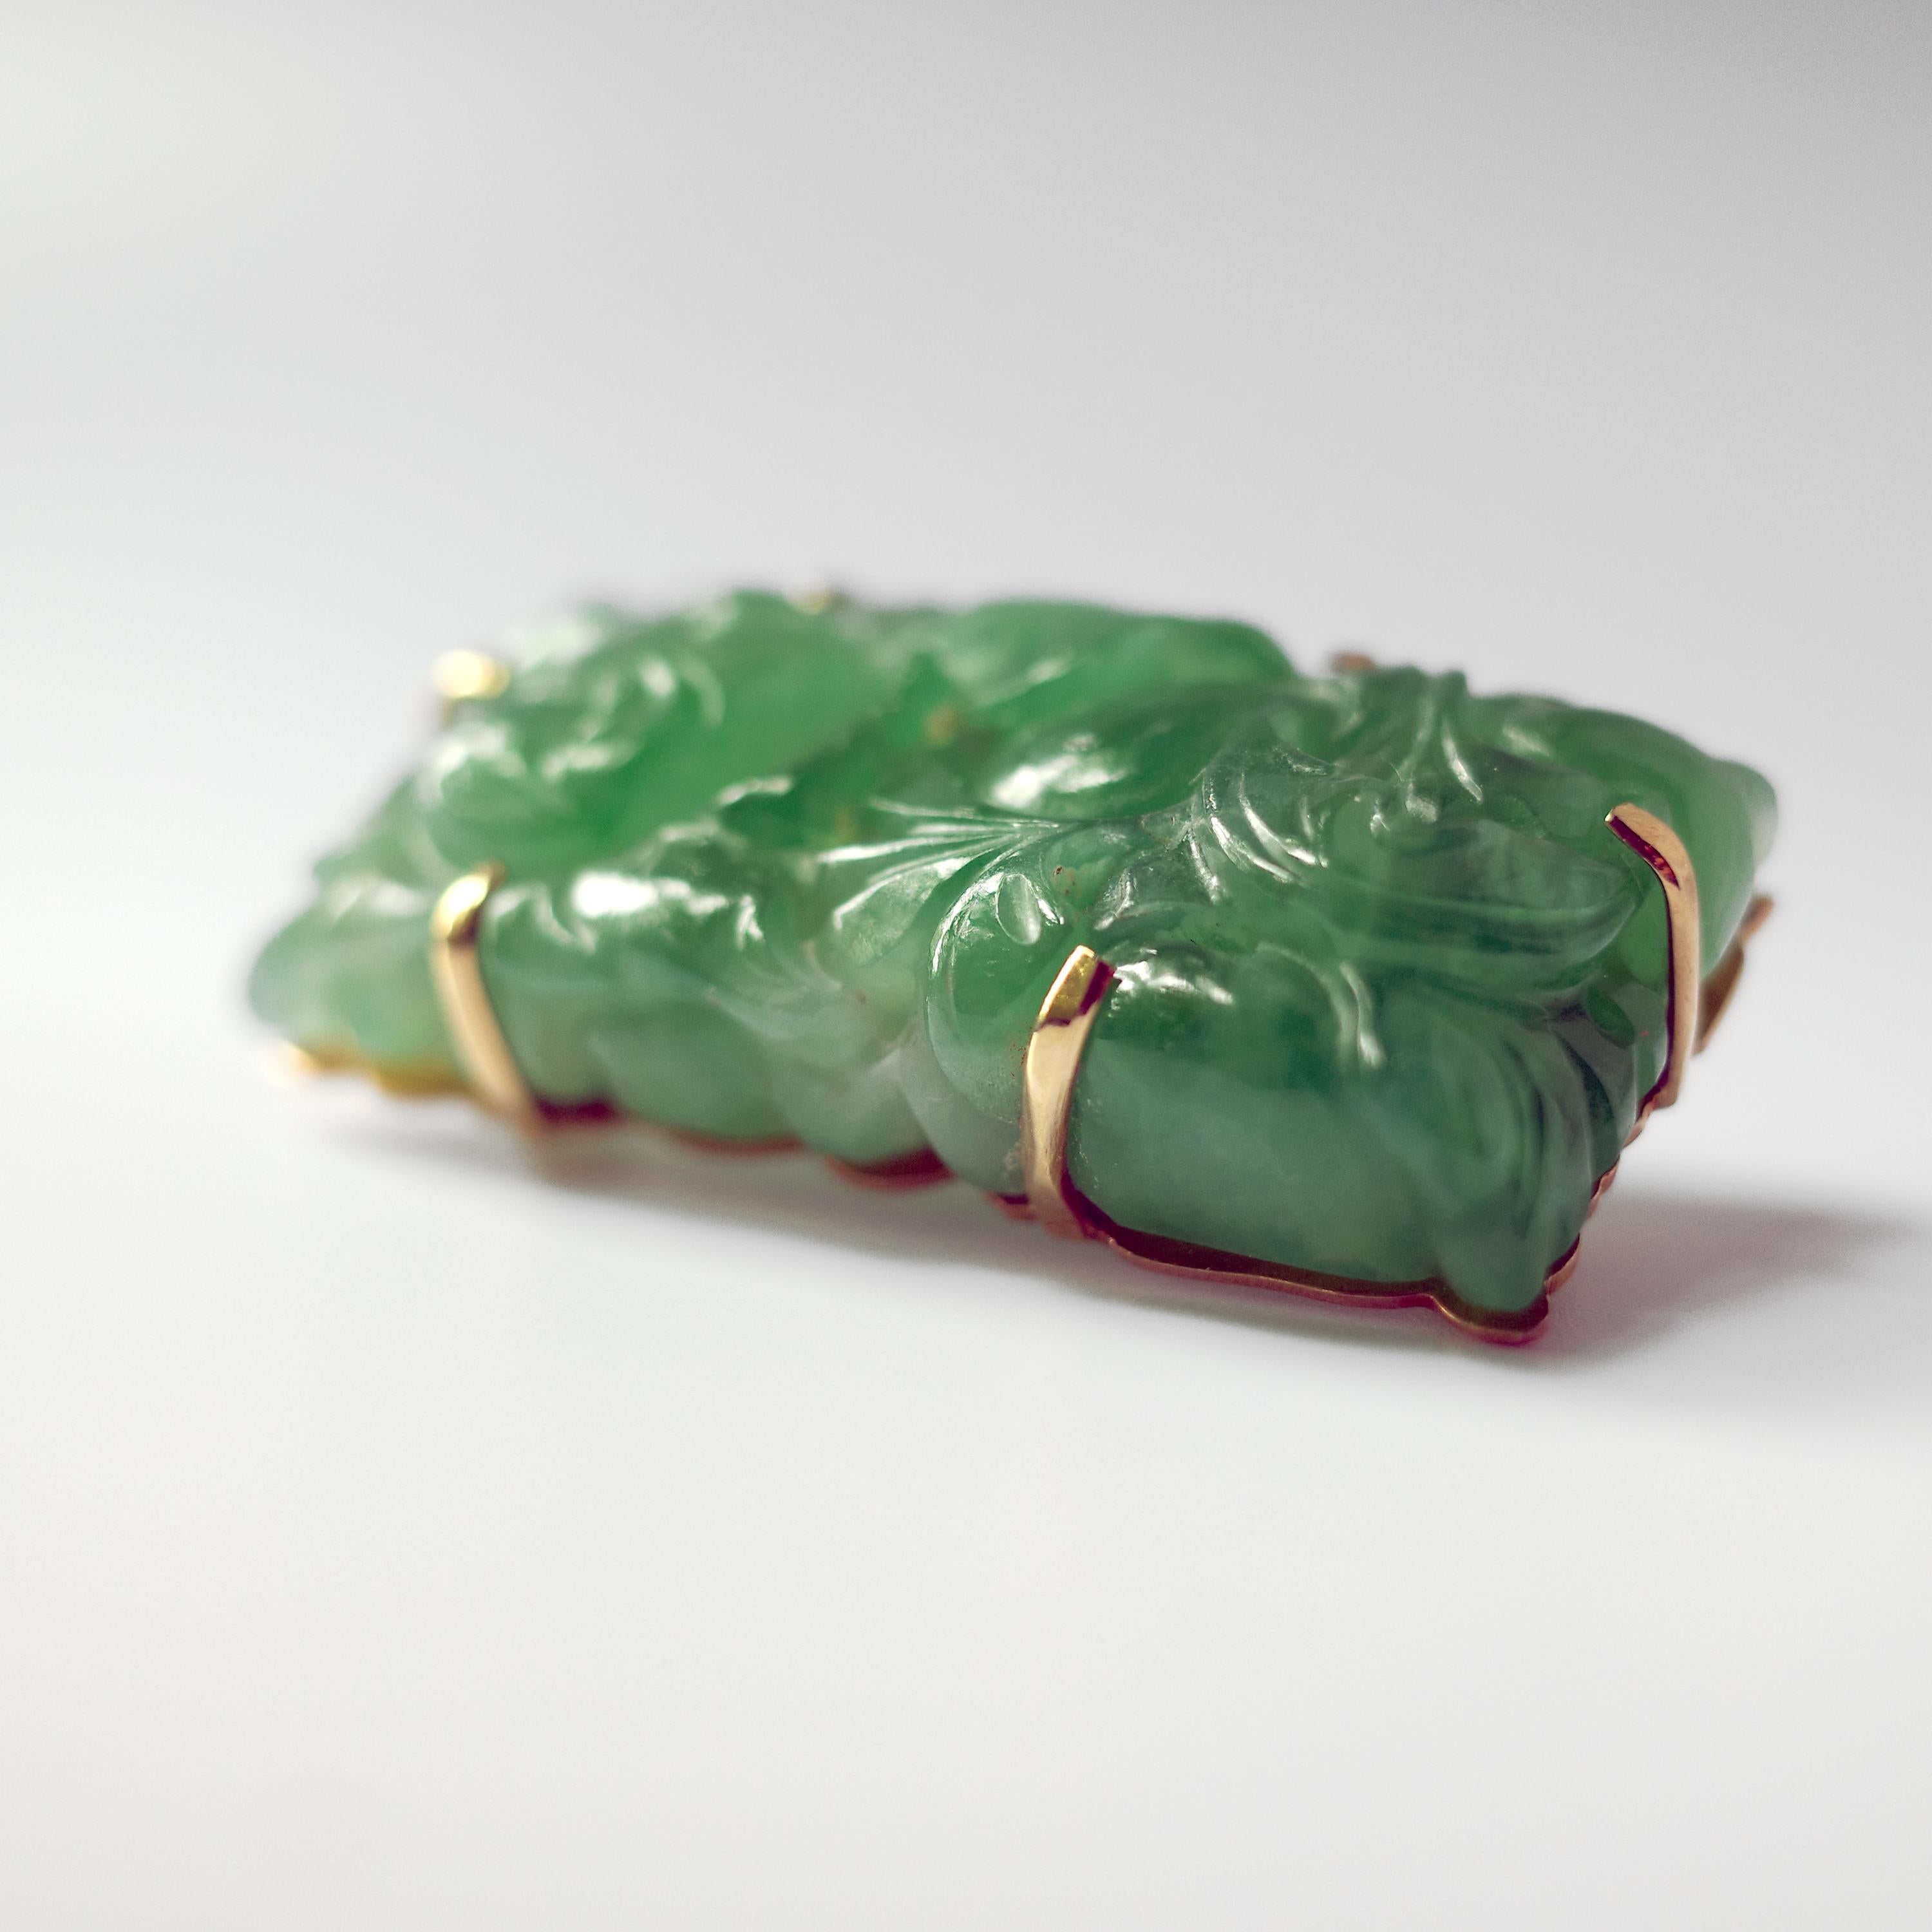 Women's Art Deco Natural and Untreated Jade Brooch in Apple Green Singularly Spectacular